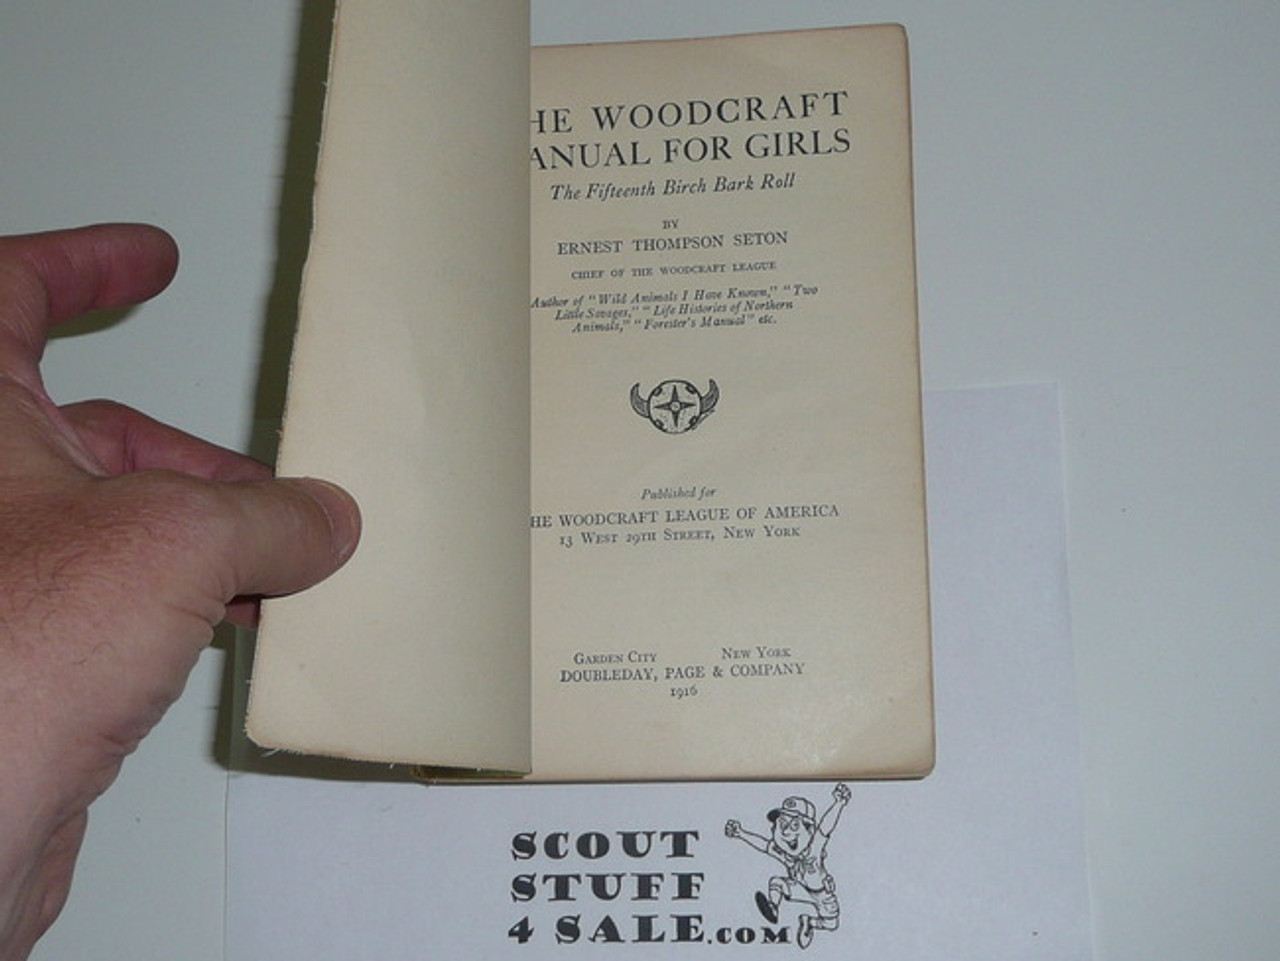 1916 The Woodcraft Manual for Girls of the Woodcraft League, Spine Wear #2, By Ernest Thompson Seton